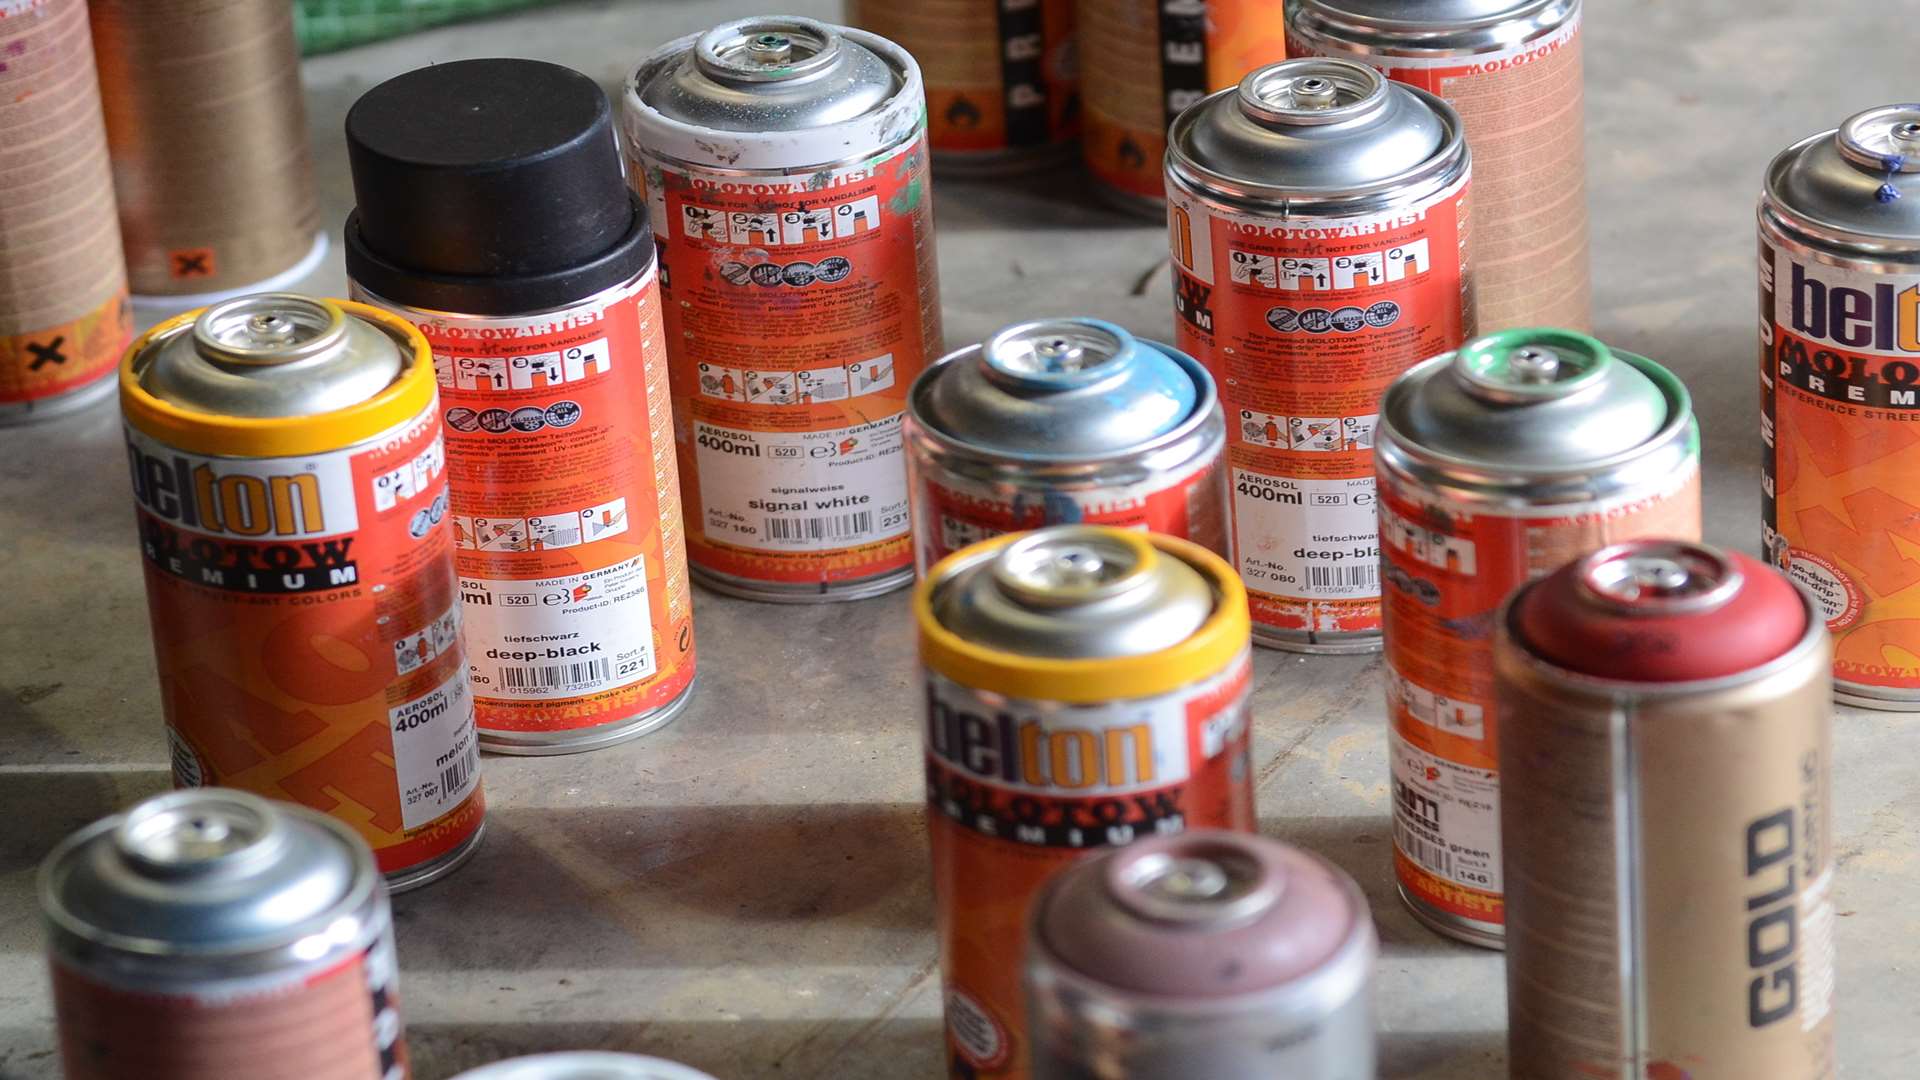 Tins of spraypaint. Stock image